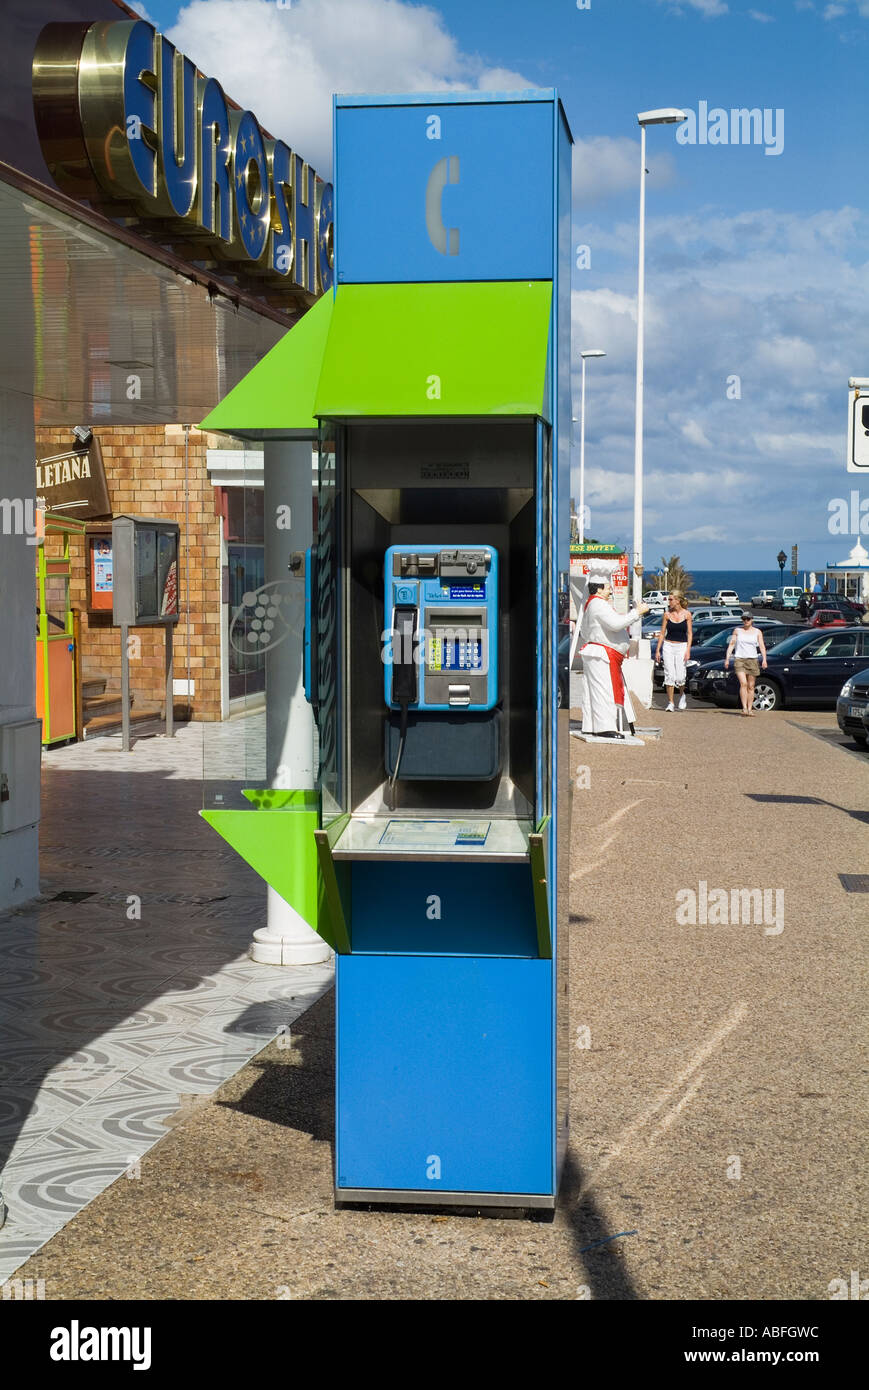 dh  TELEPHONE LANZAROTE Lanzarote Telefonica coin operated public telephone pay box Stock Photo